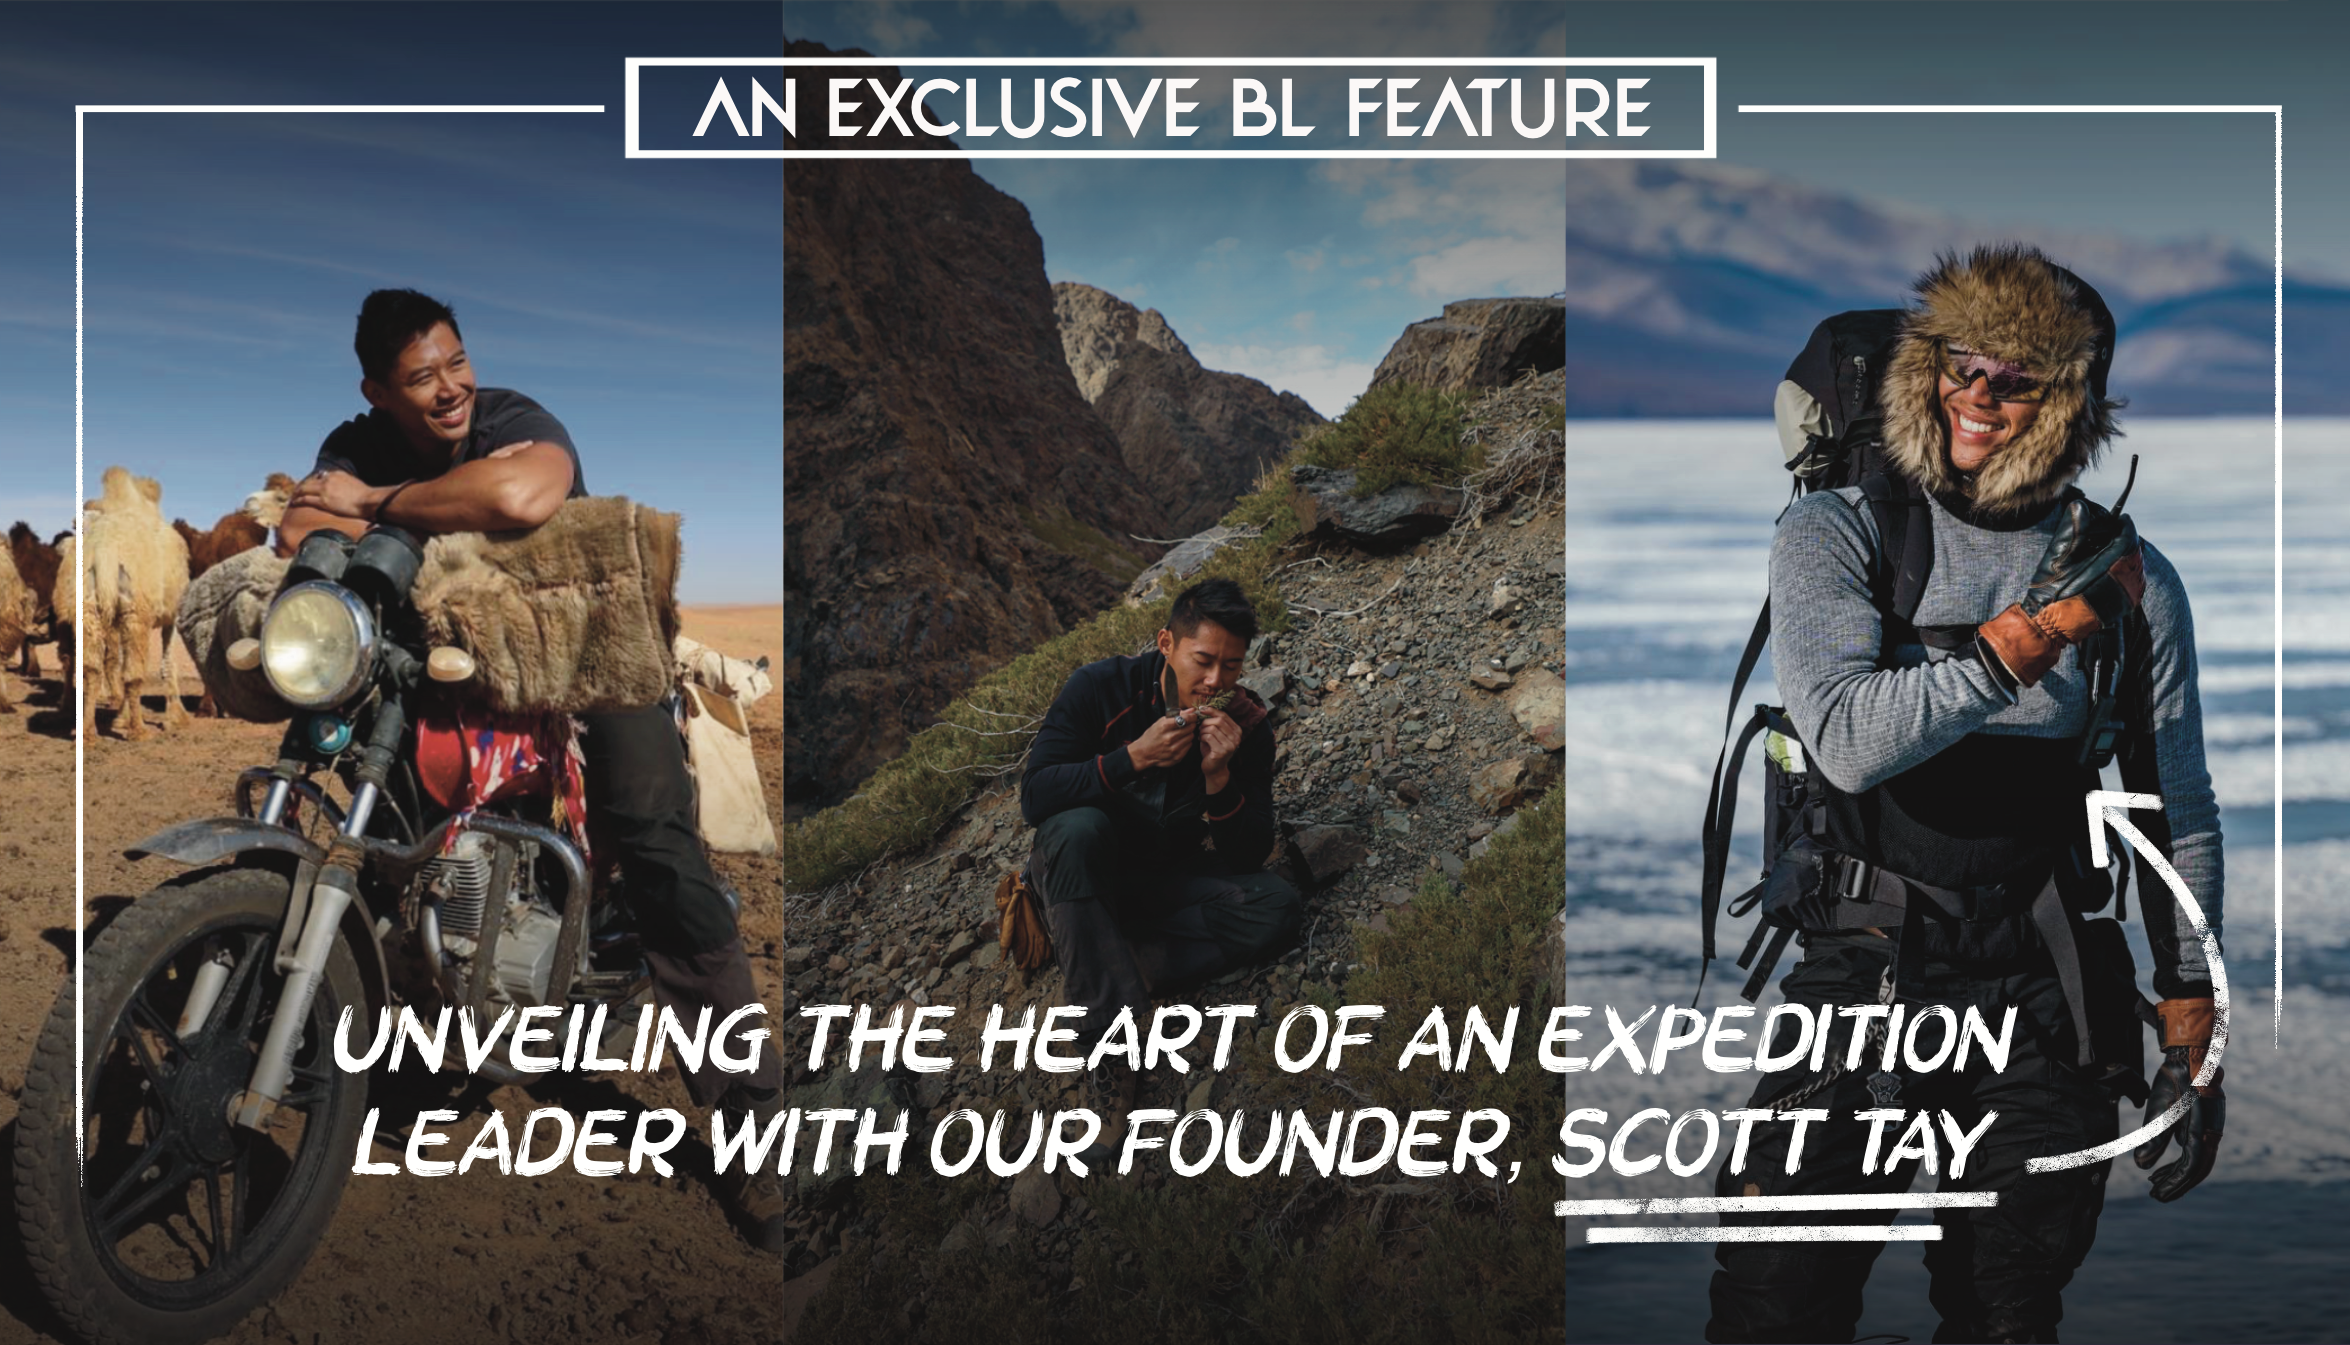 An Exclusive Beyond Limits Feature: Unveiling the Heart of an Expedition Leader with our Founder, Scott Tay